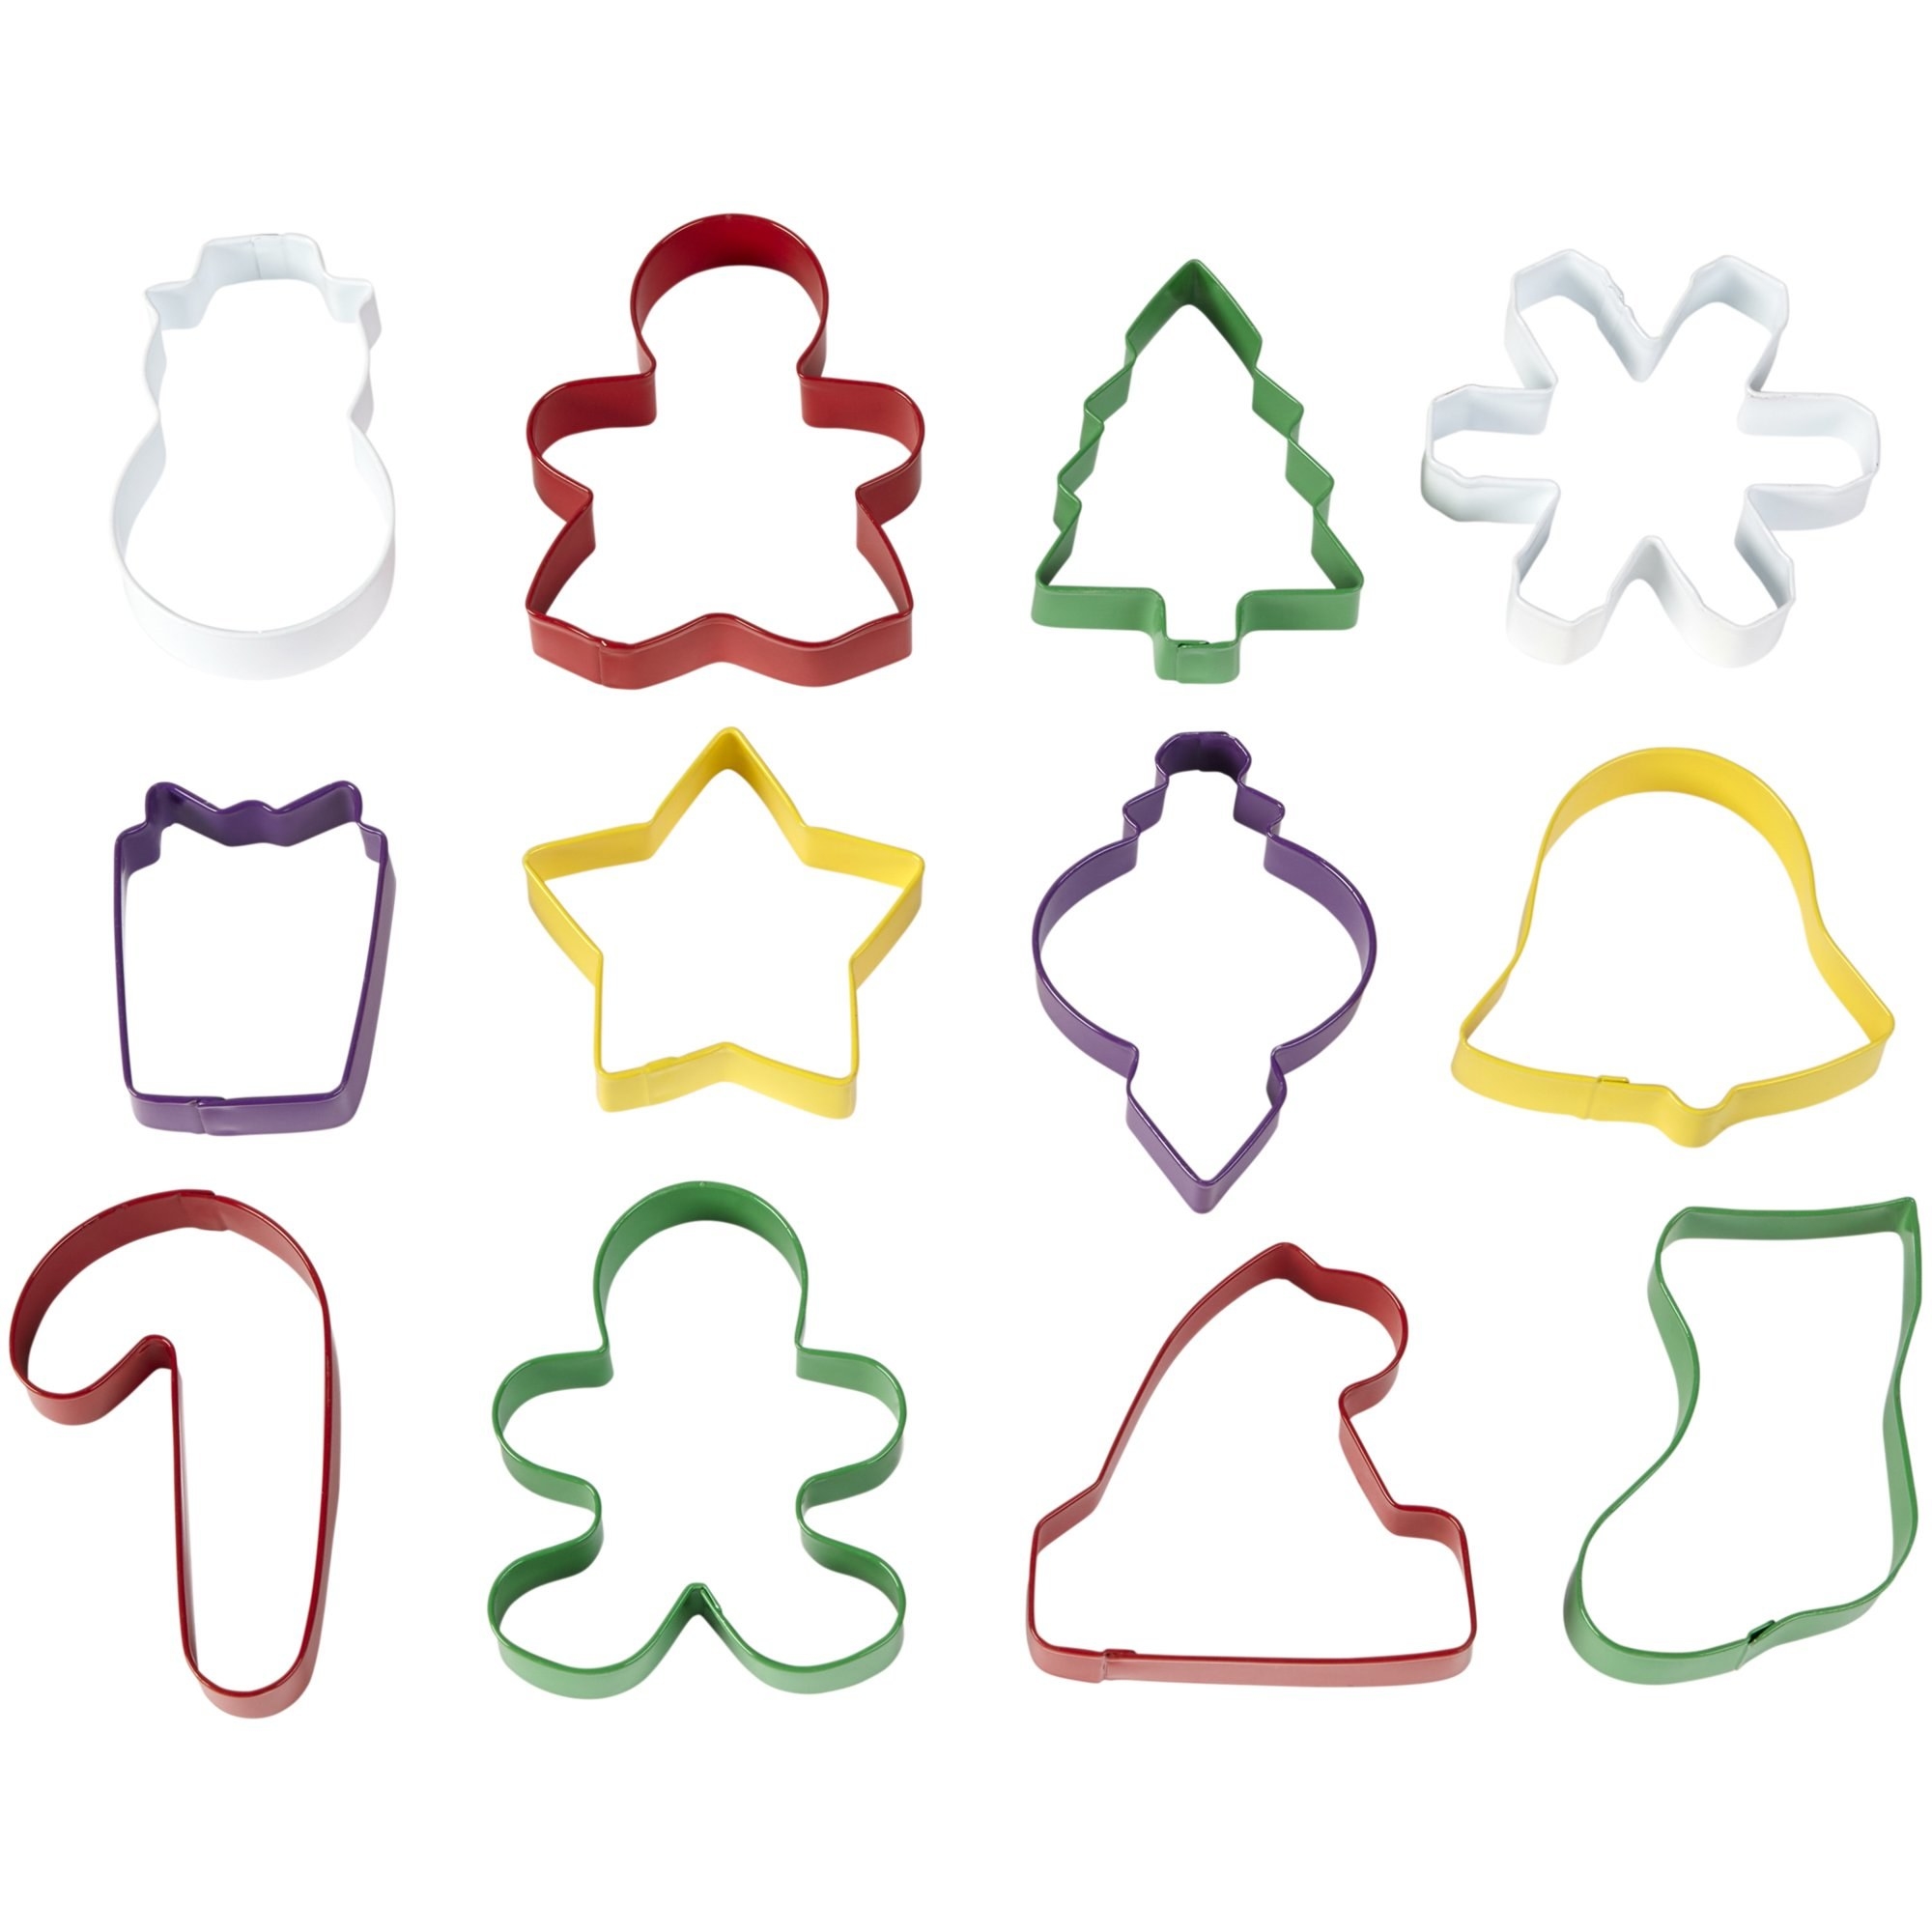 12 holiday-themed cookie cutters: snowman, snow angel, Christmas tree, snowflake, wrapped gift with a bow, star, ornament, bell, candy cane, gingerbread man, Santa&#x27;s hat, and stocking